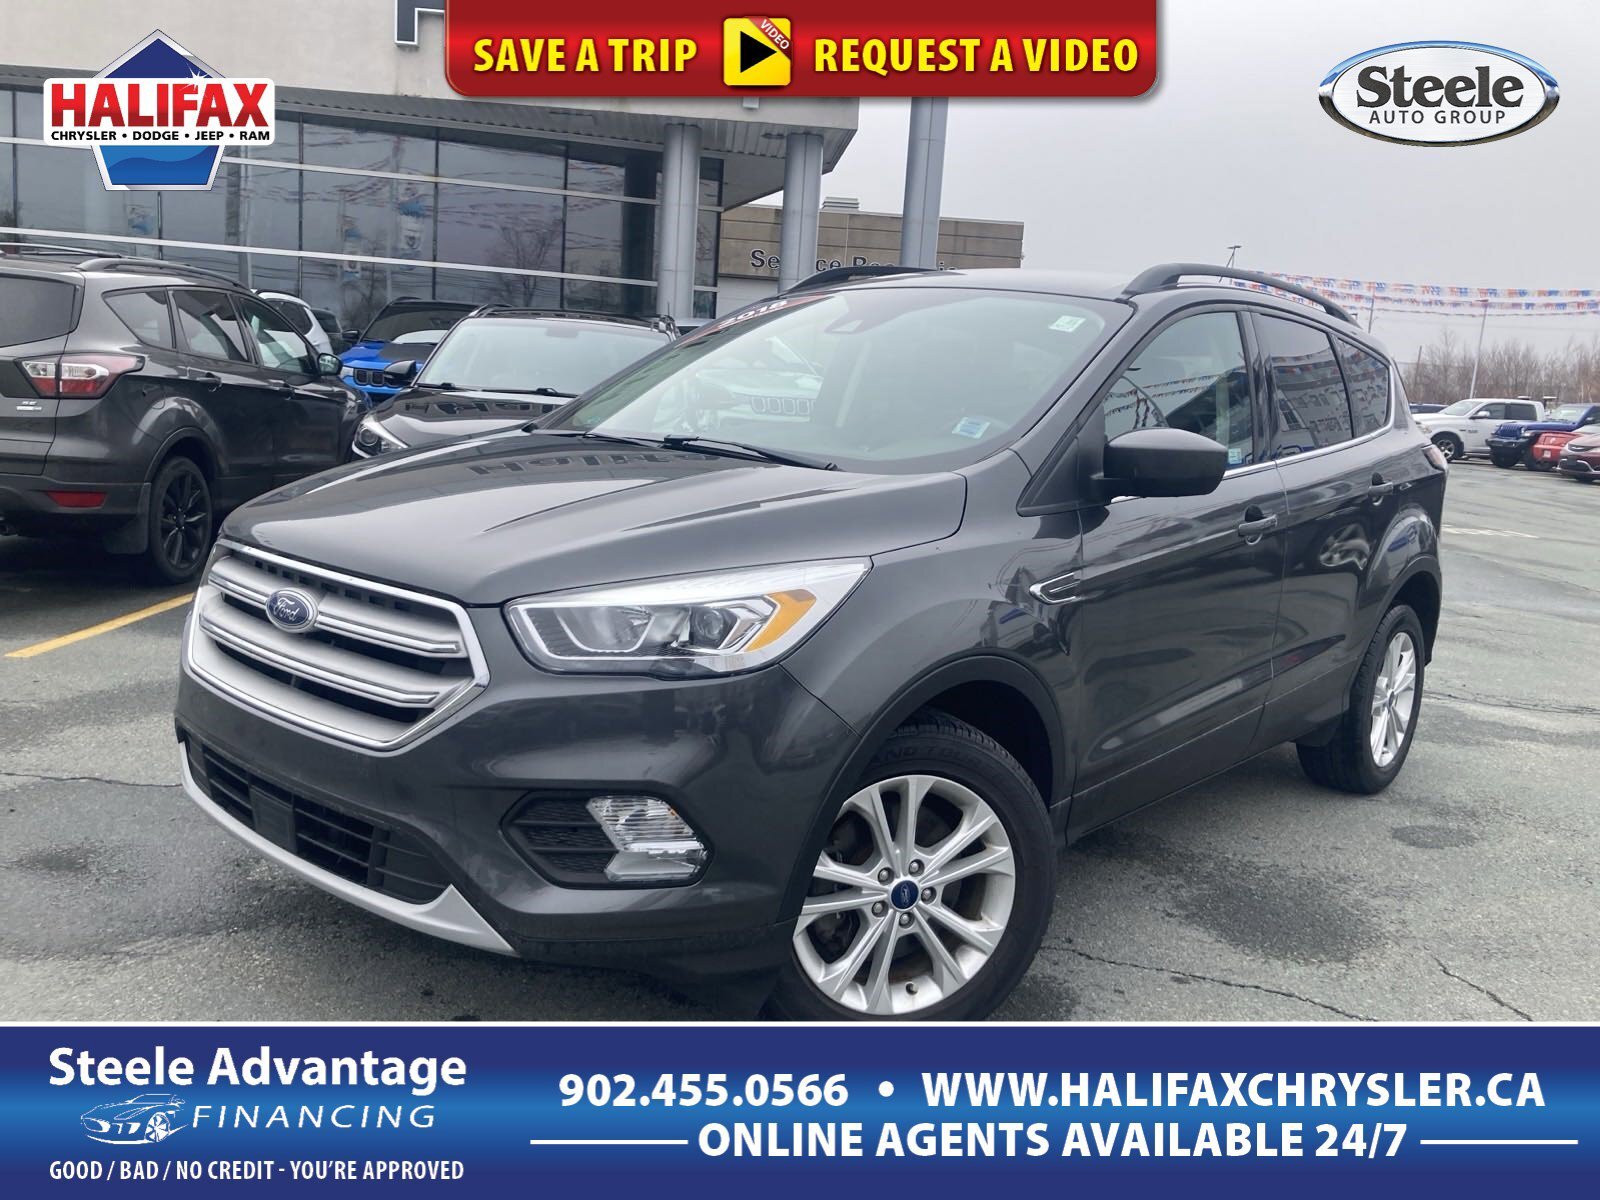 2018 Ford Escape SEL - LOW KM, 4WD, HEATED LEATHER SEATS, ONE OWNER